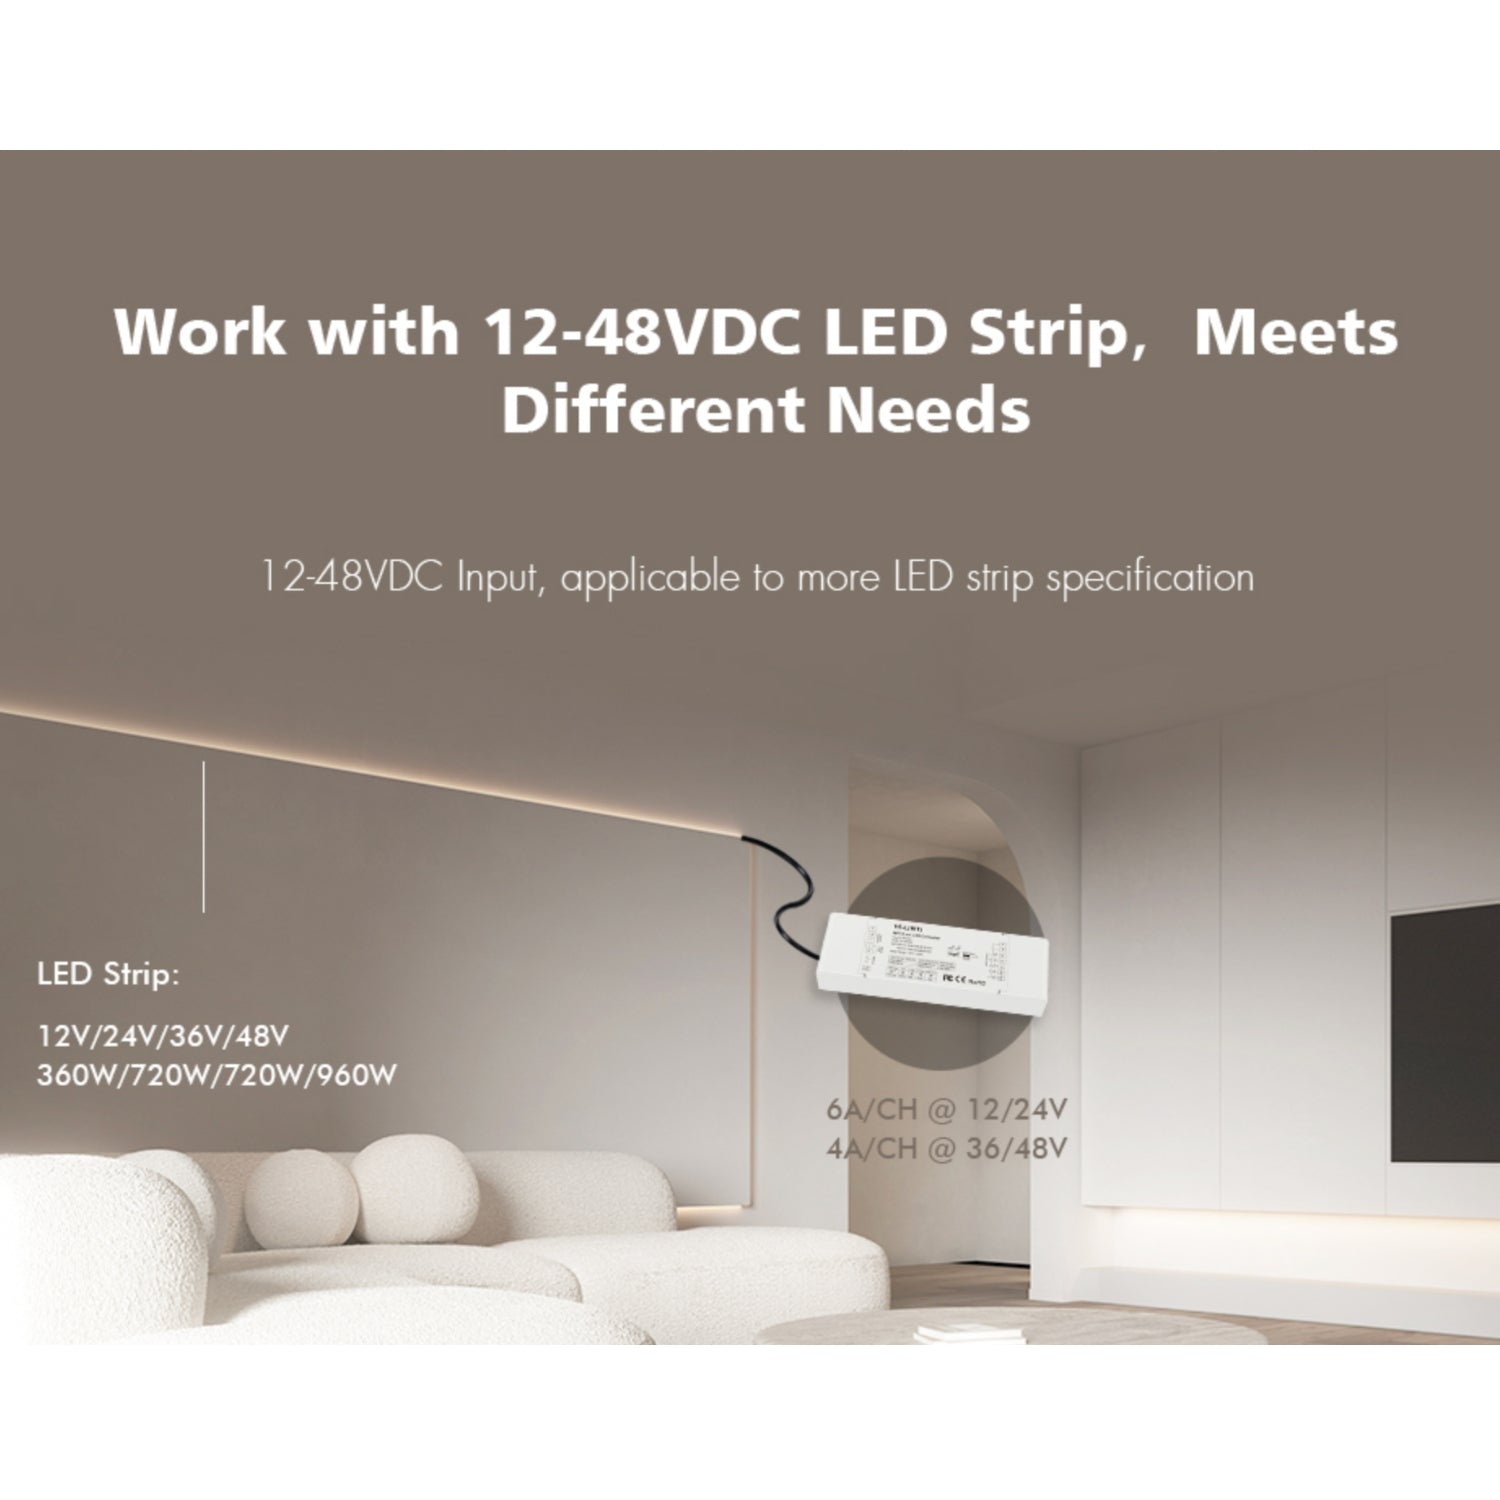 Skydance 12-48VDC 5CH*6A WiFi & RF 5 in 1 LED Controller V5-L(WT) with R8 Remote - ATOM LED